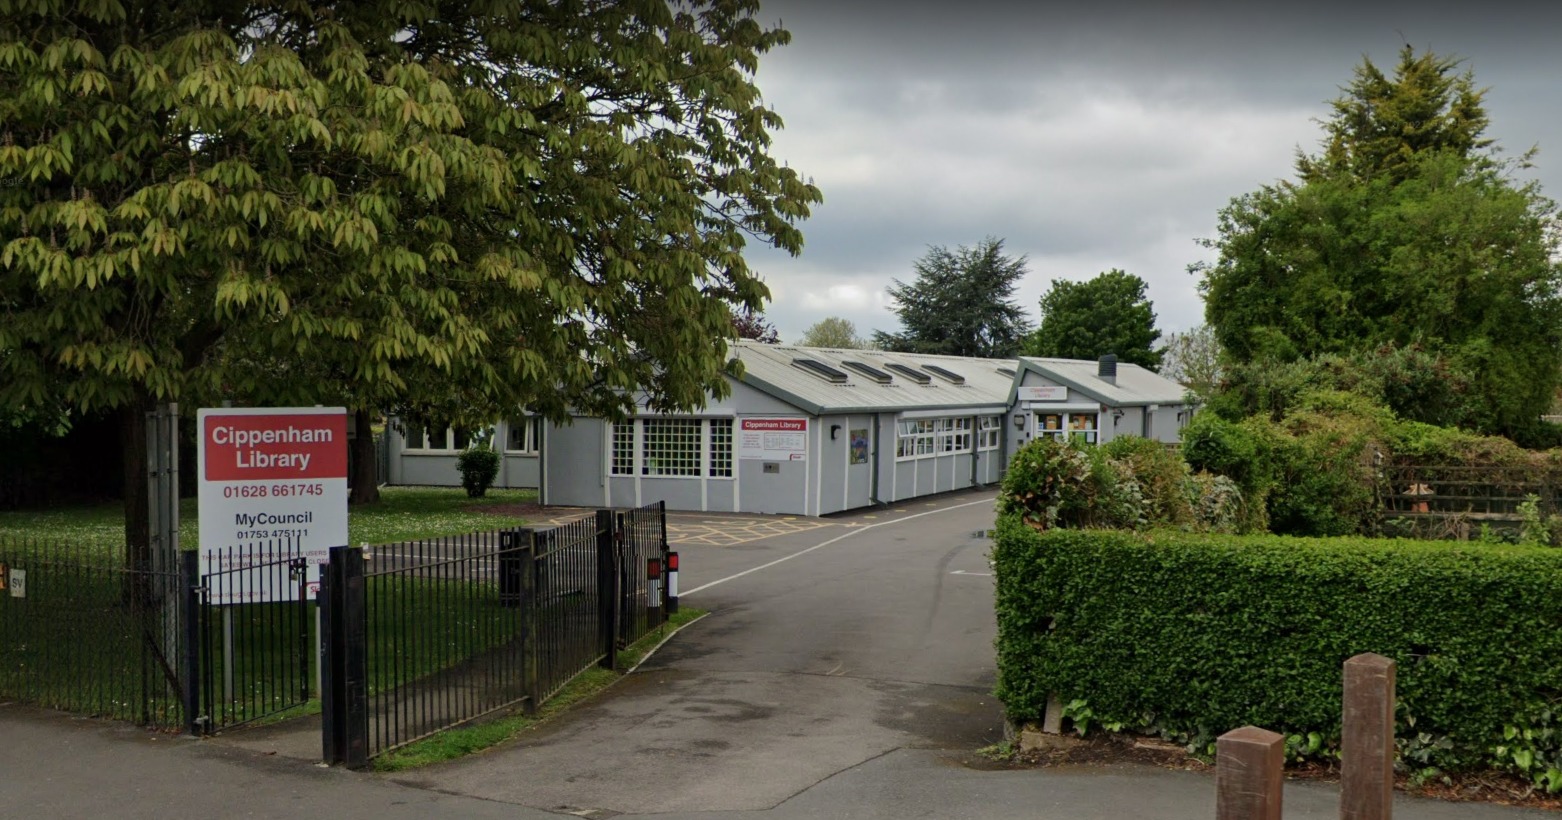 Cippenham library could close depending on the consultation results